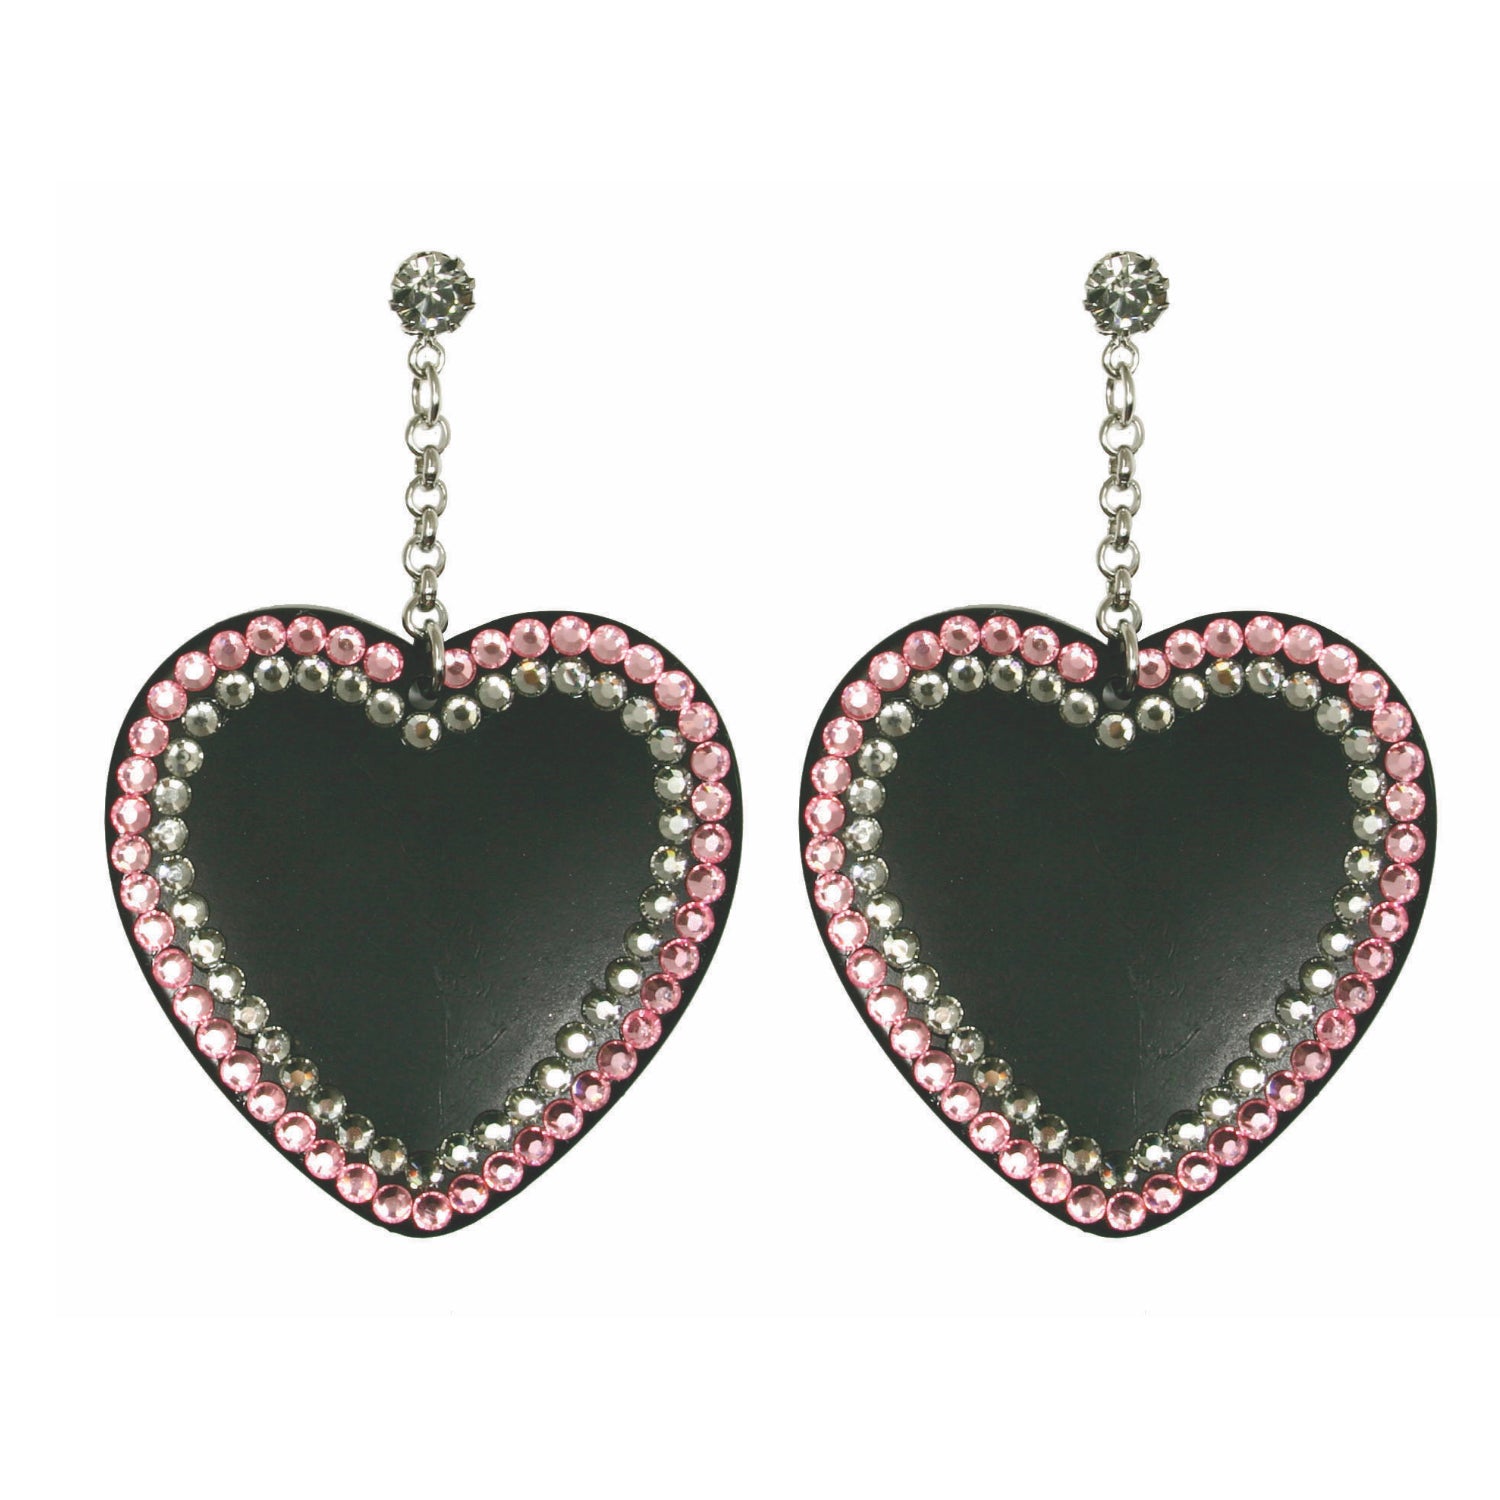 LARGE PAVE' HEARTS